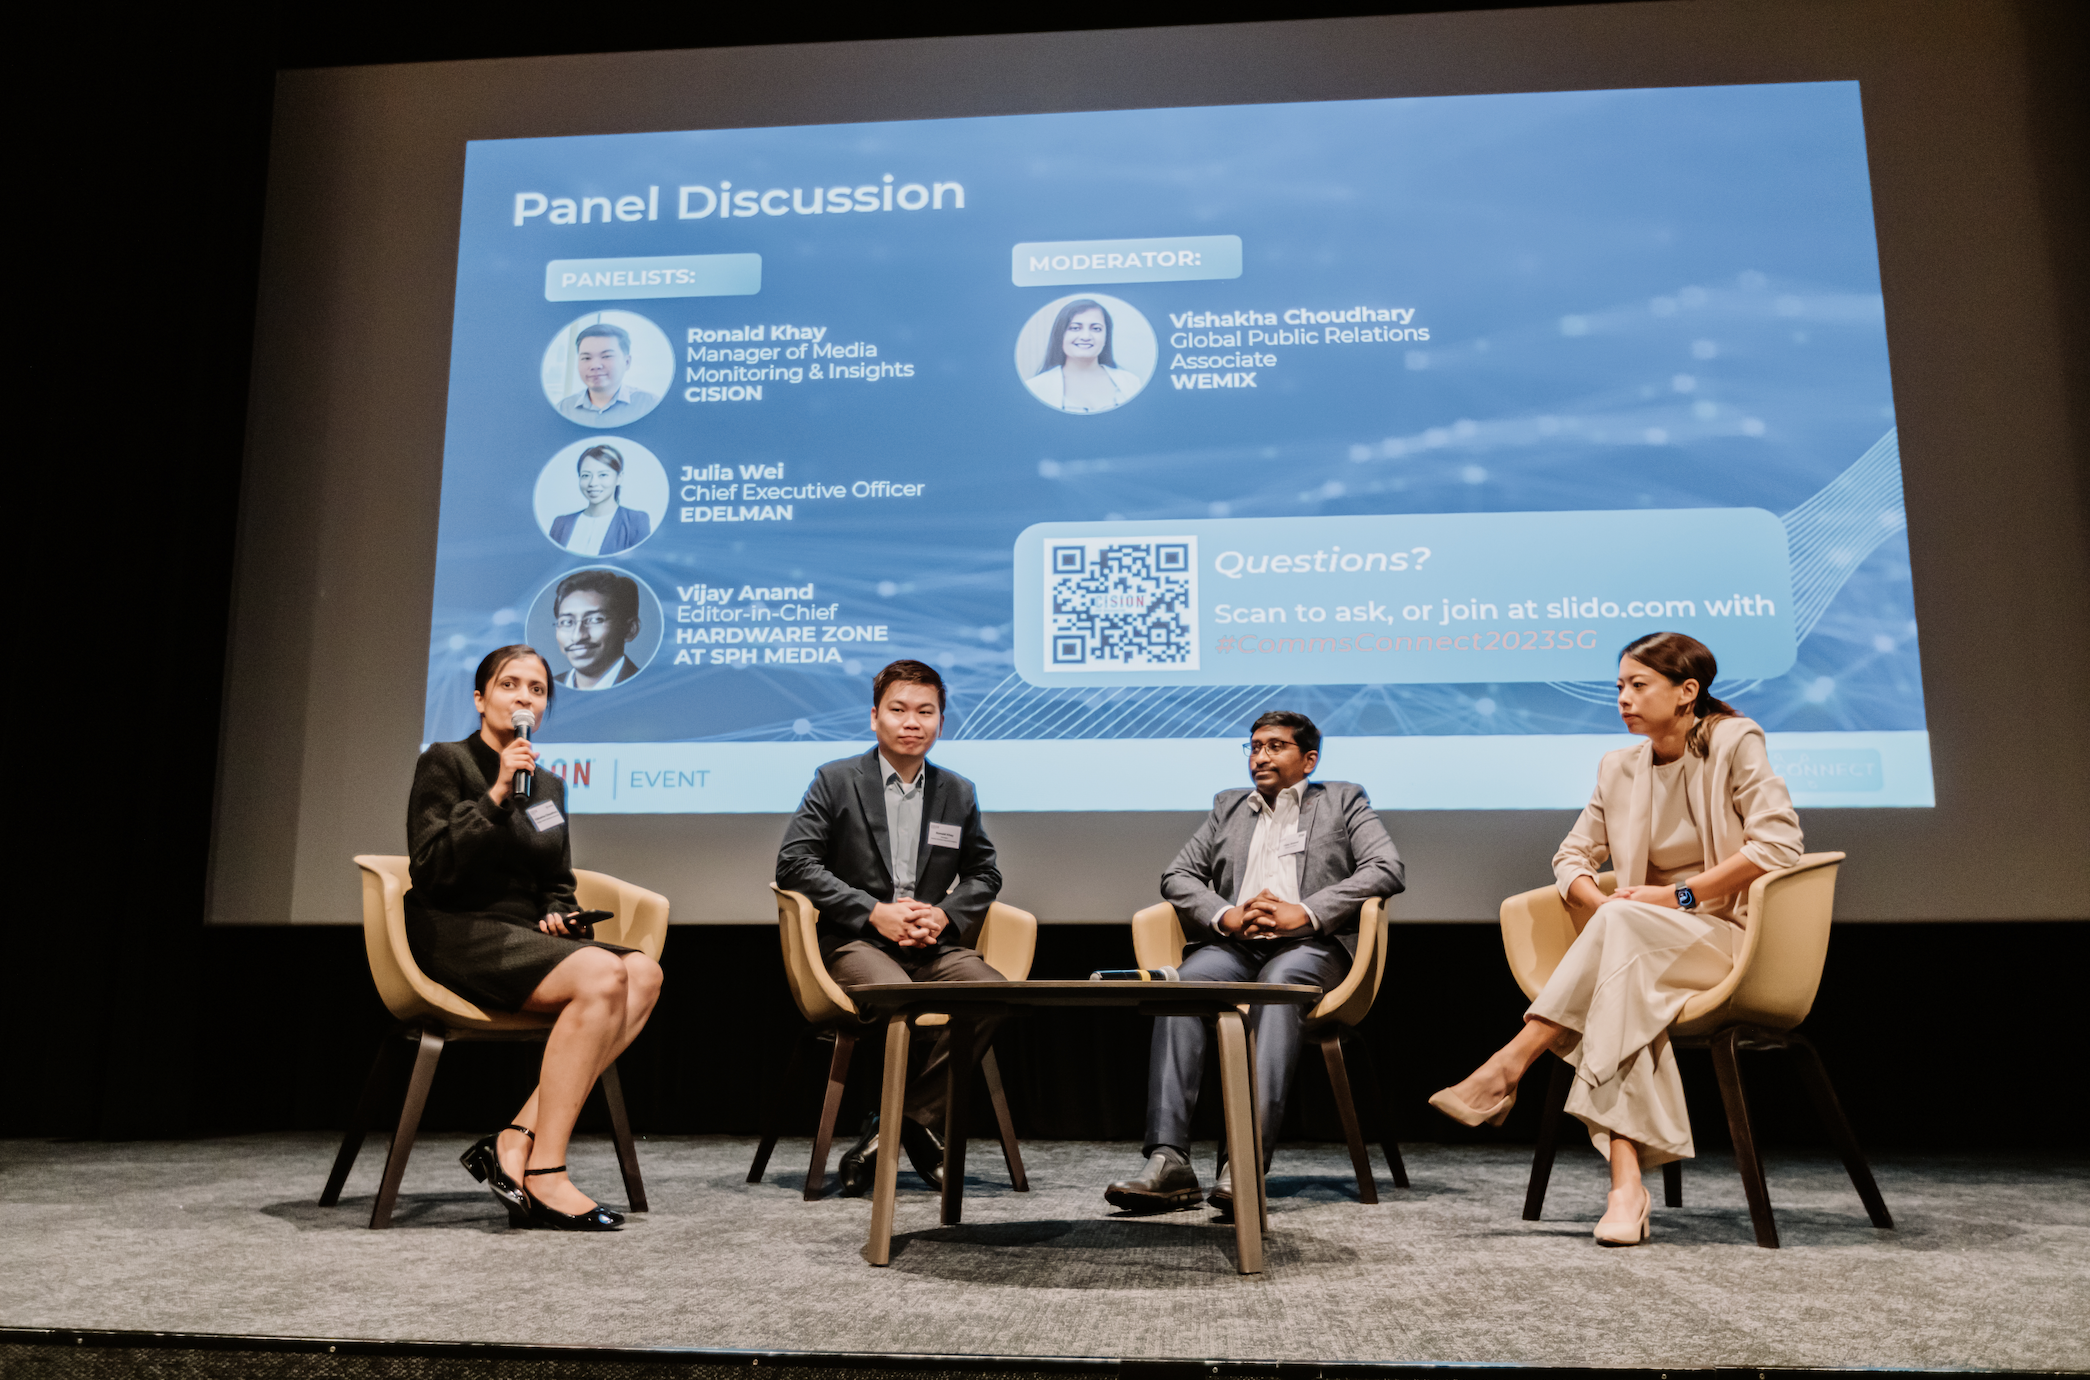 Creating impactful content requires data, insight, and experience - Key takeaways from the Comms Connect Event in Singapore